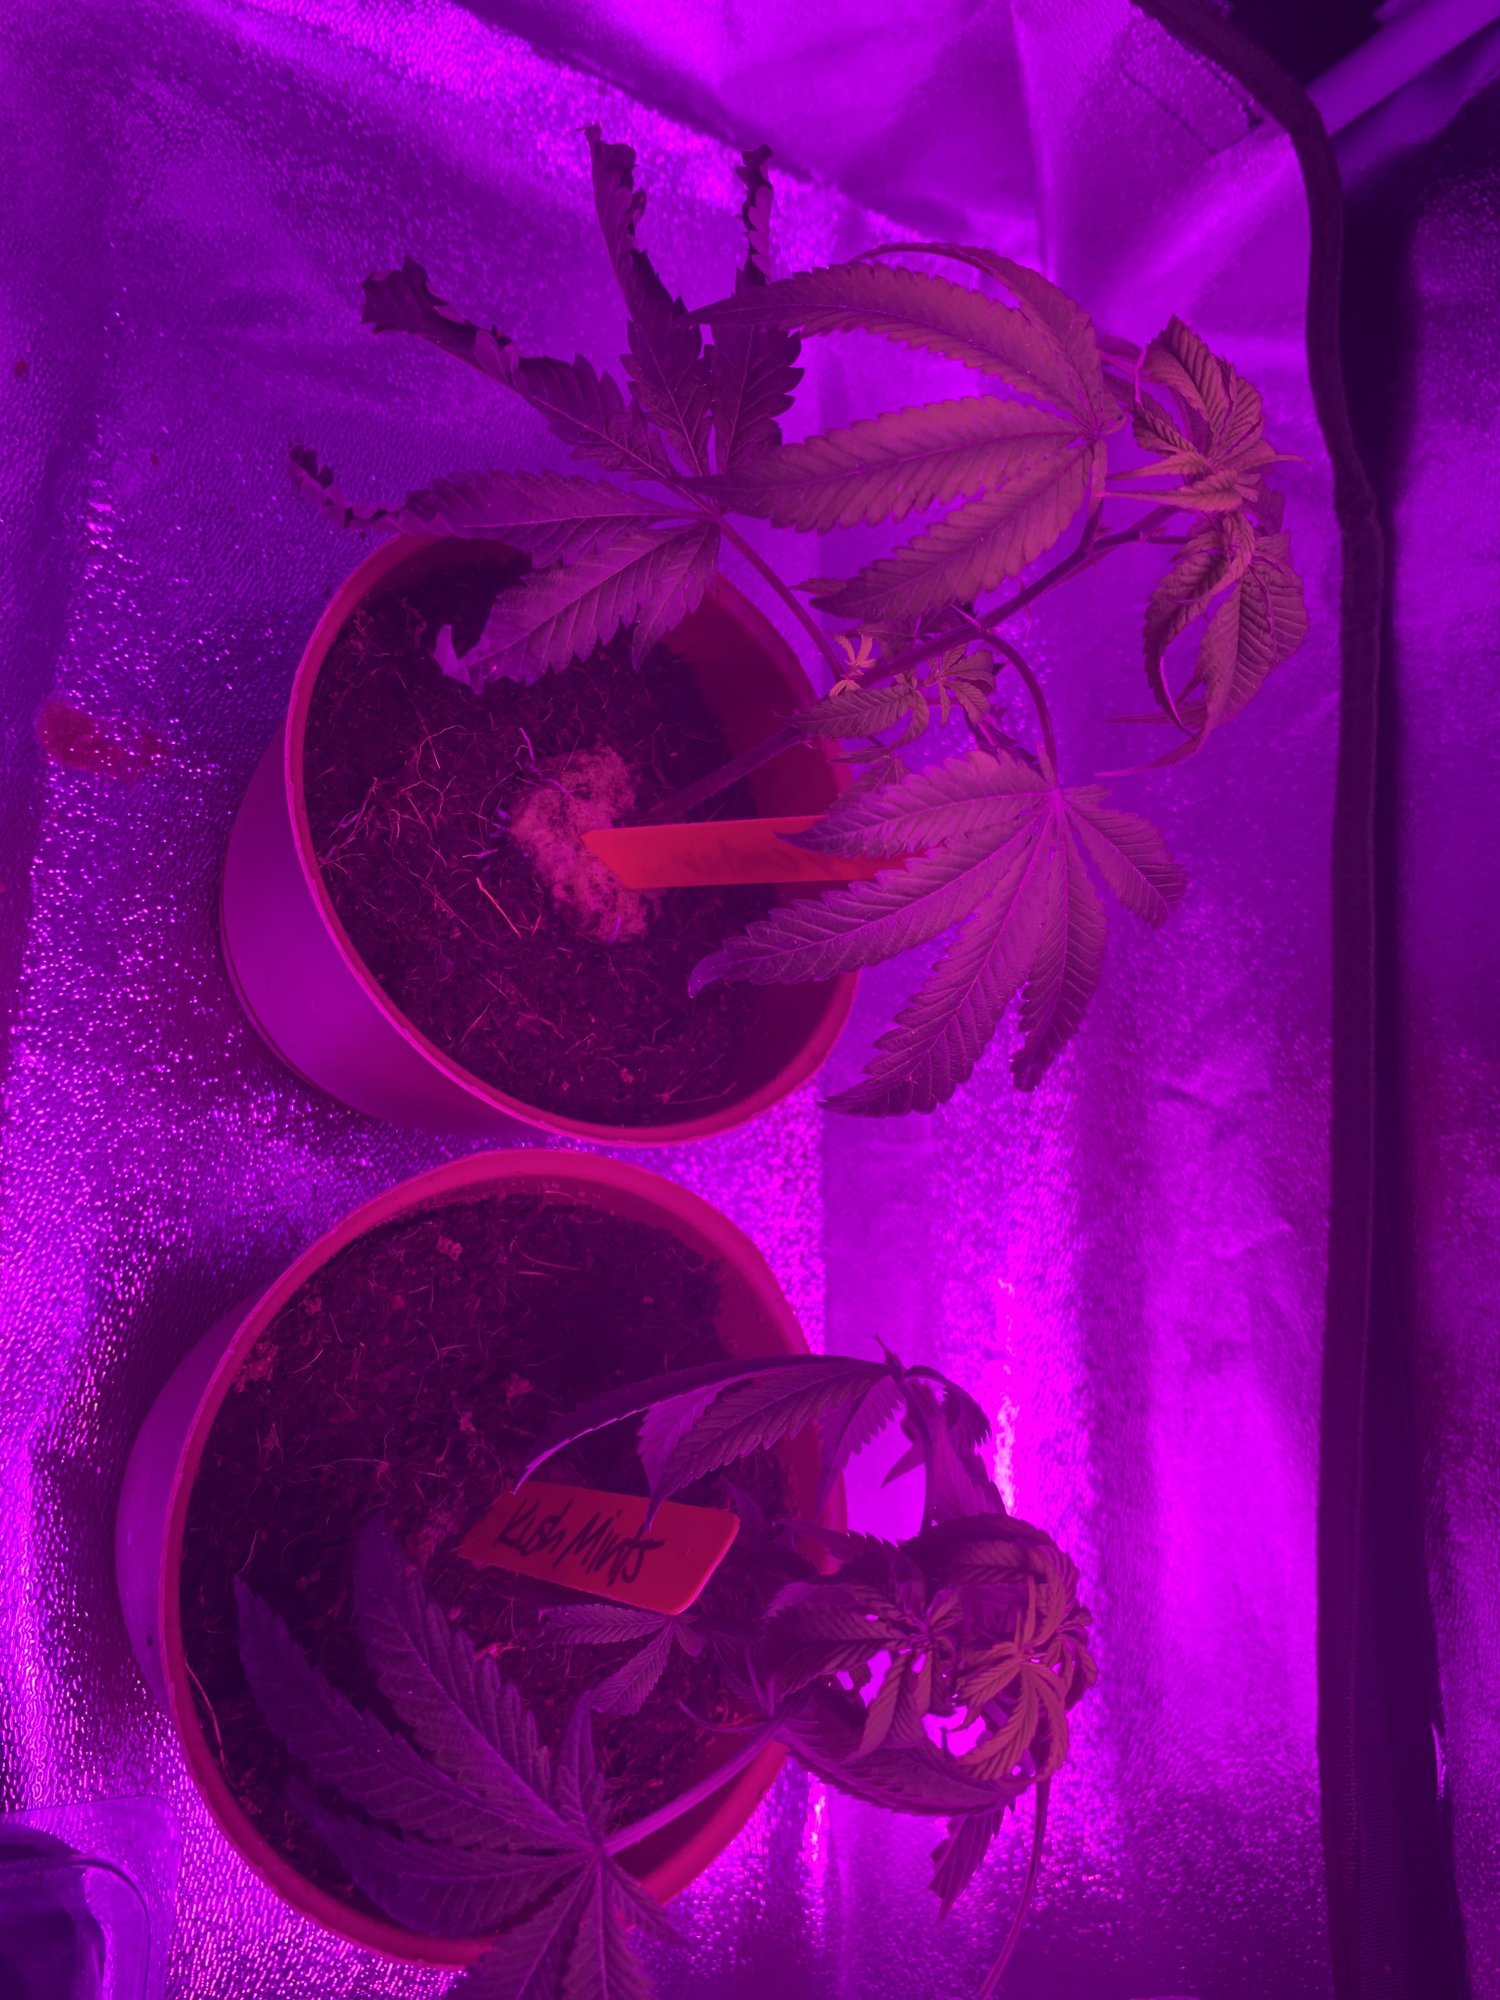 First time grower and my plants are struggling